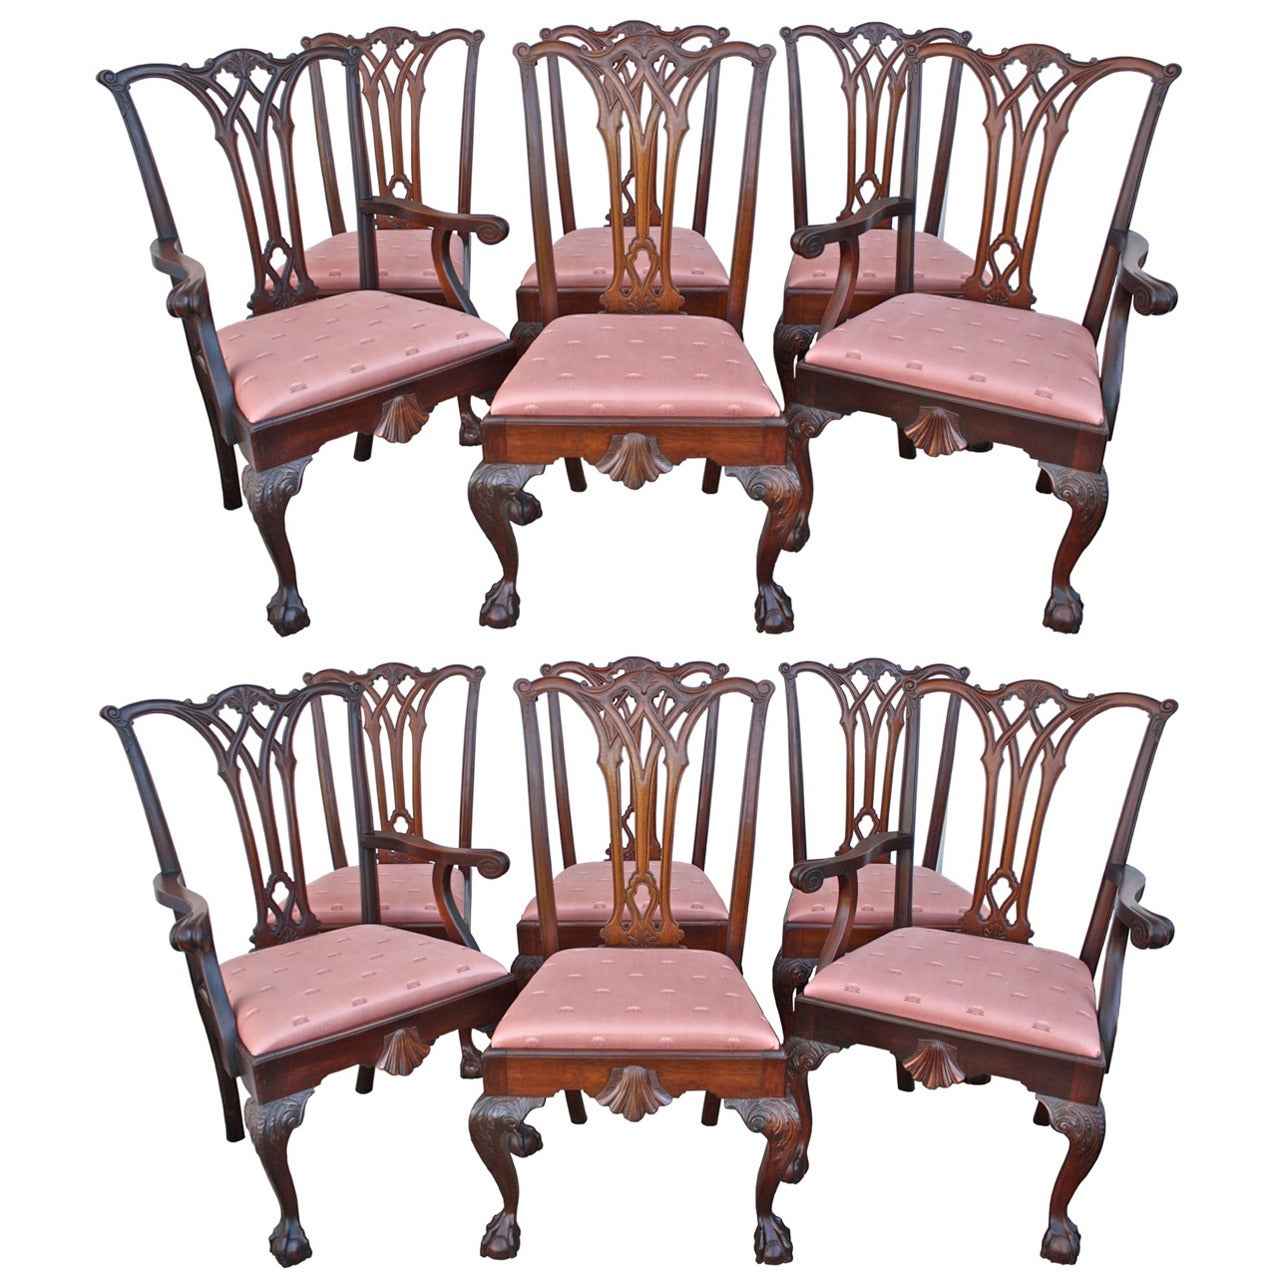 Set of 12 Philadelphia Chippendale Revival Dining Chairs